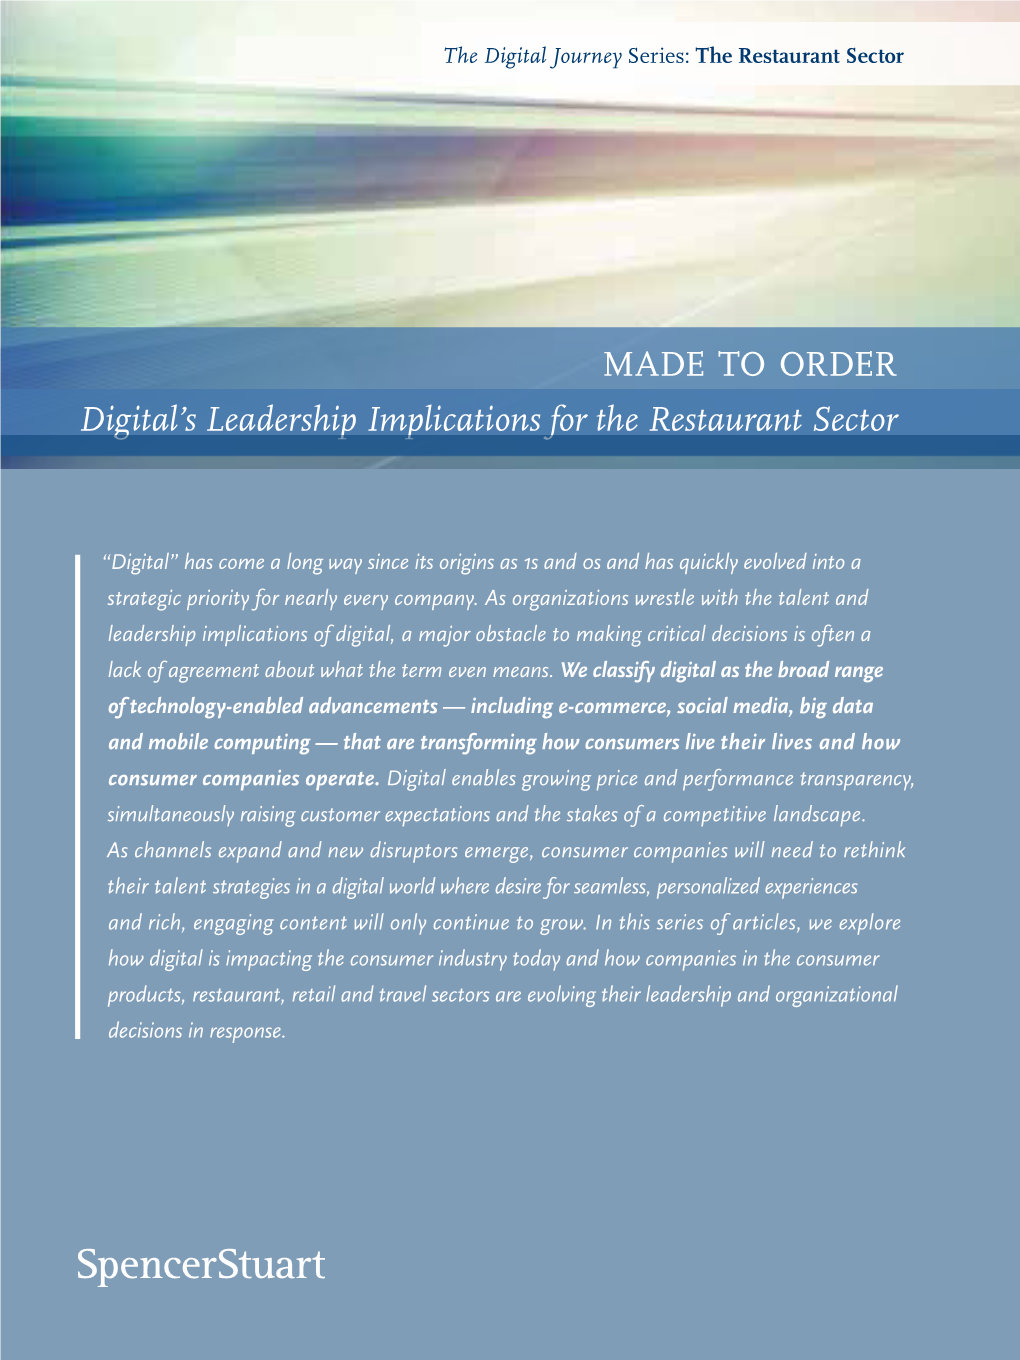 Made to Order Digital's Leadership Implications for the Restaurant Sector